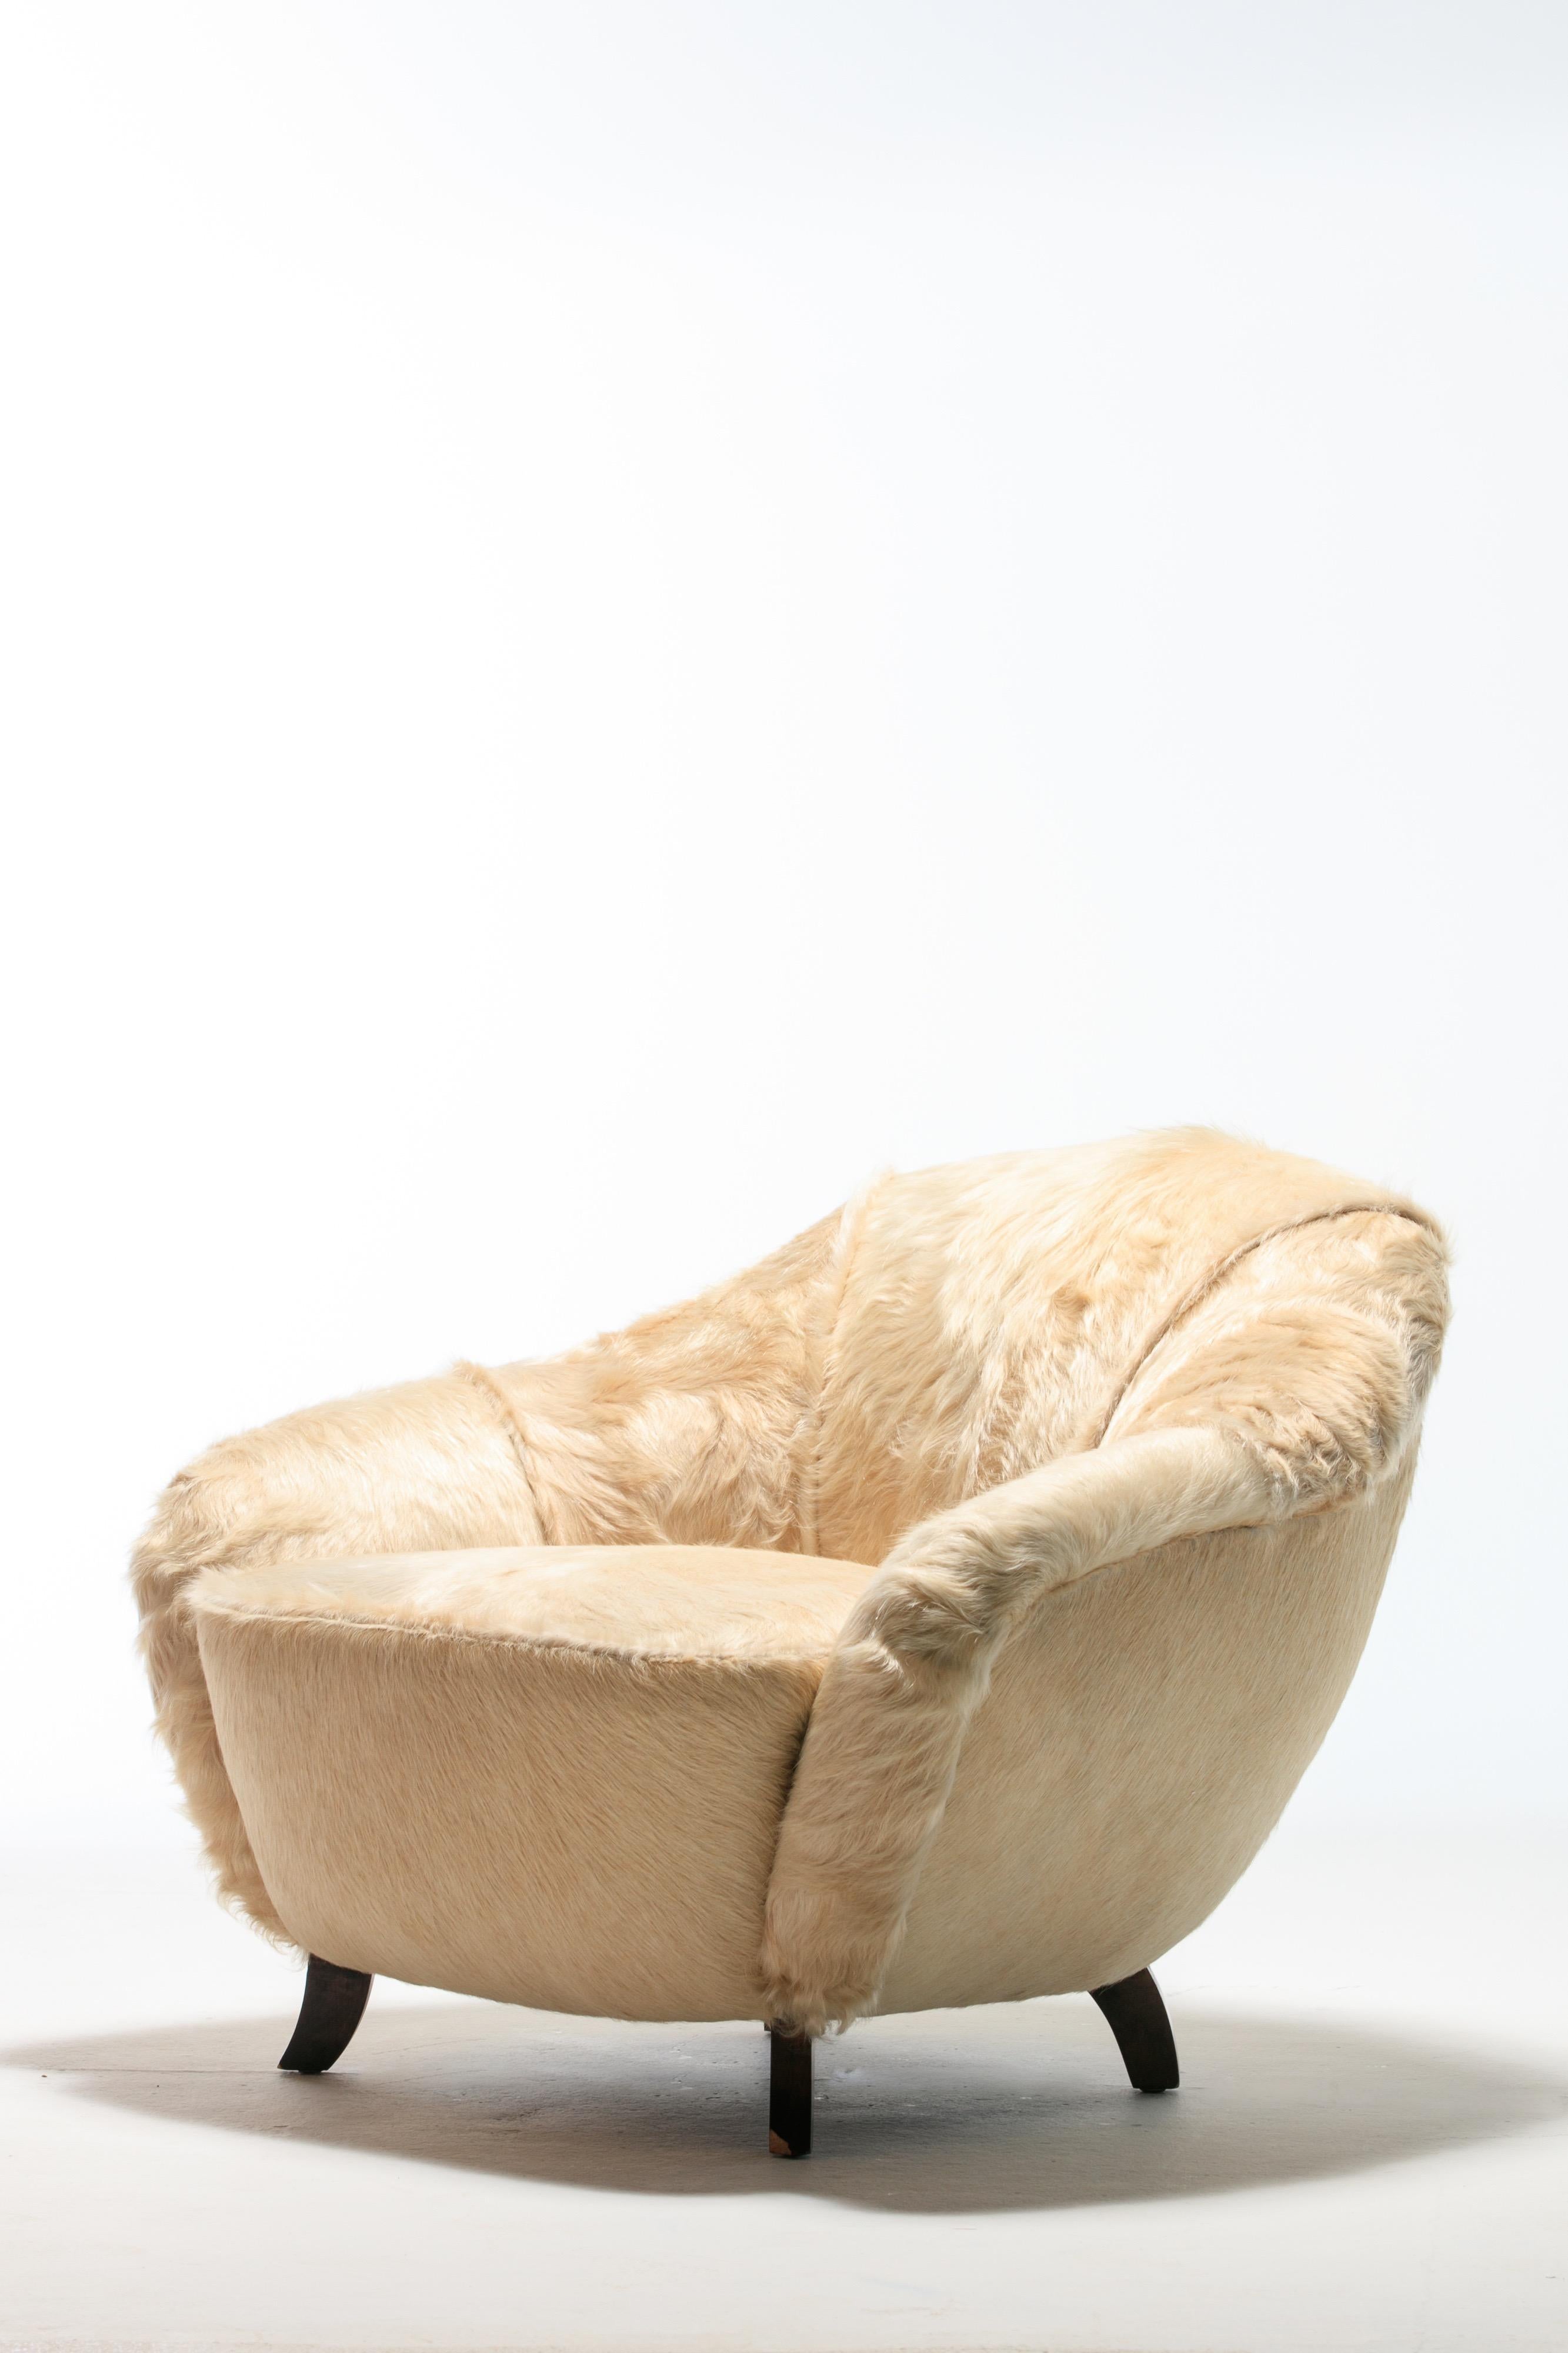 Luxuriously reupholstered in rich champagne tone Brazilian cowhides, this 1930s lounge chair designed by Gilbert Rohde for Herman Miller - Easy Chair model number 3950 - was featured in photos in Chicago's Herman Miller Showroom as early as 1939.